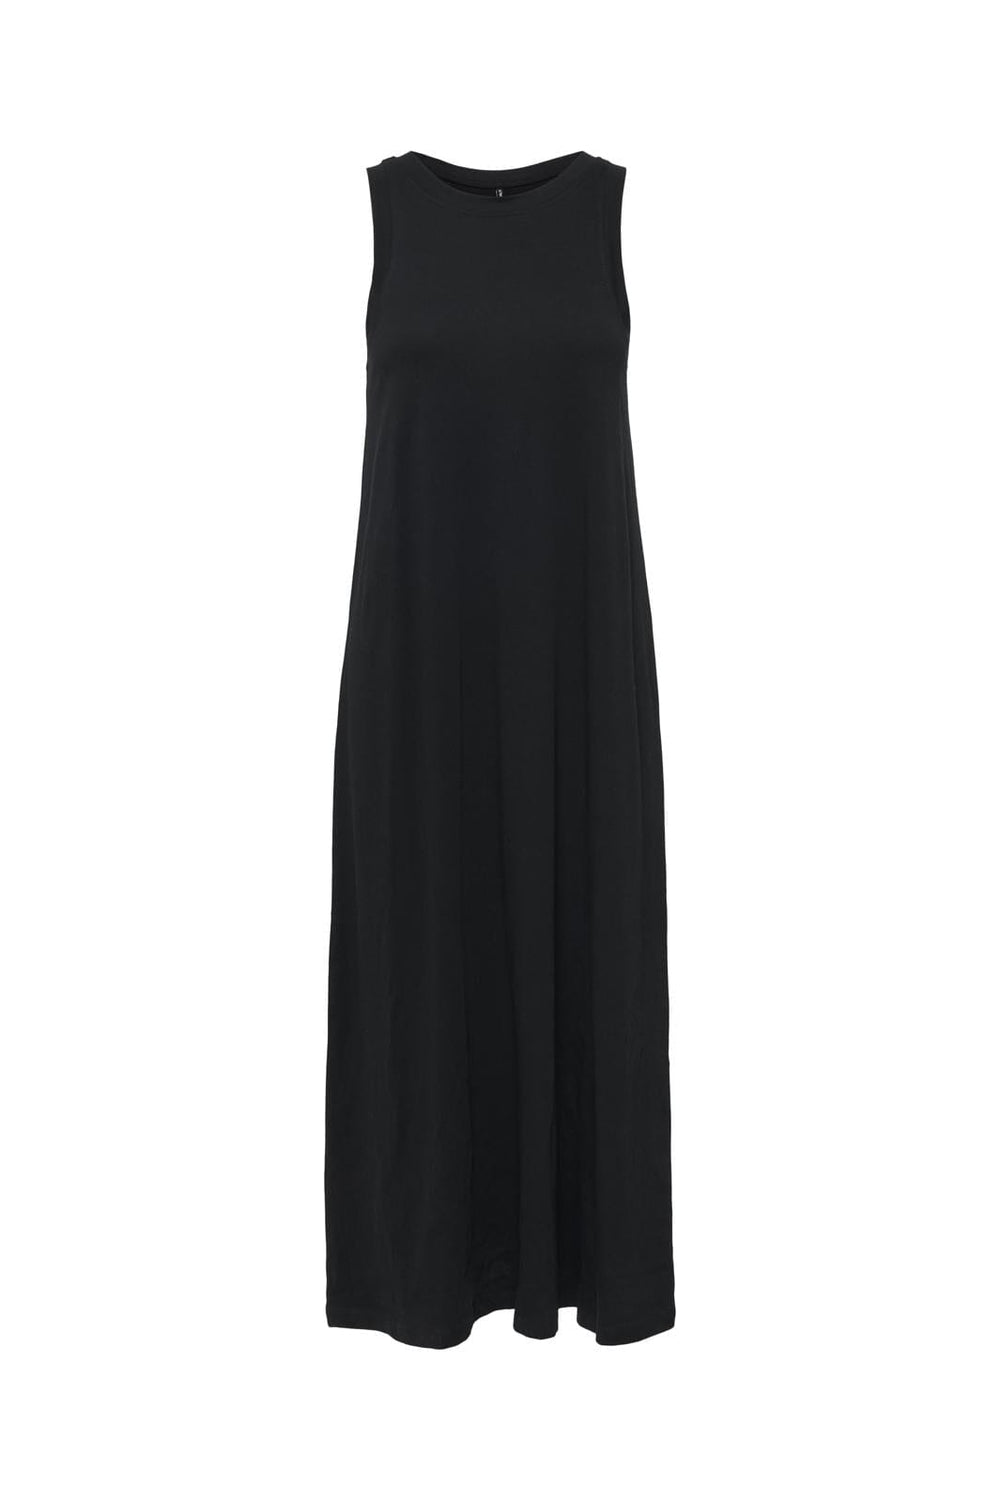 Only - Onlmay Life S/L Long Dress - 4163718 Black